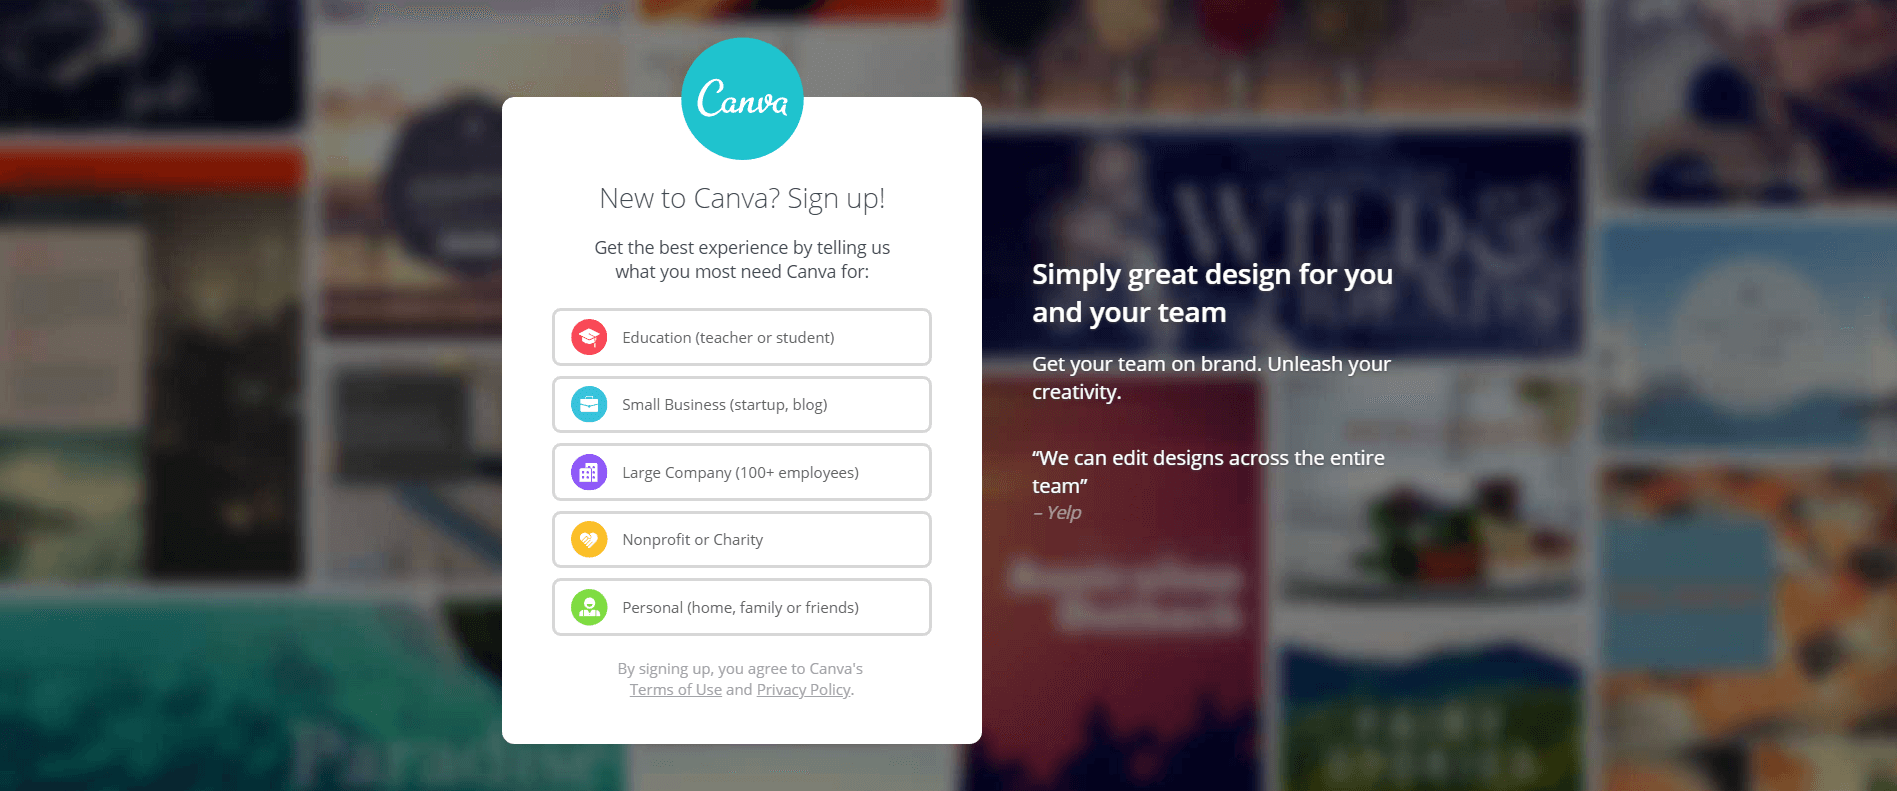 The Canva website.